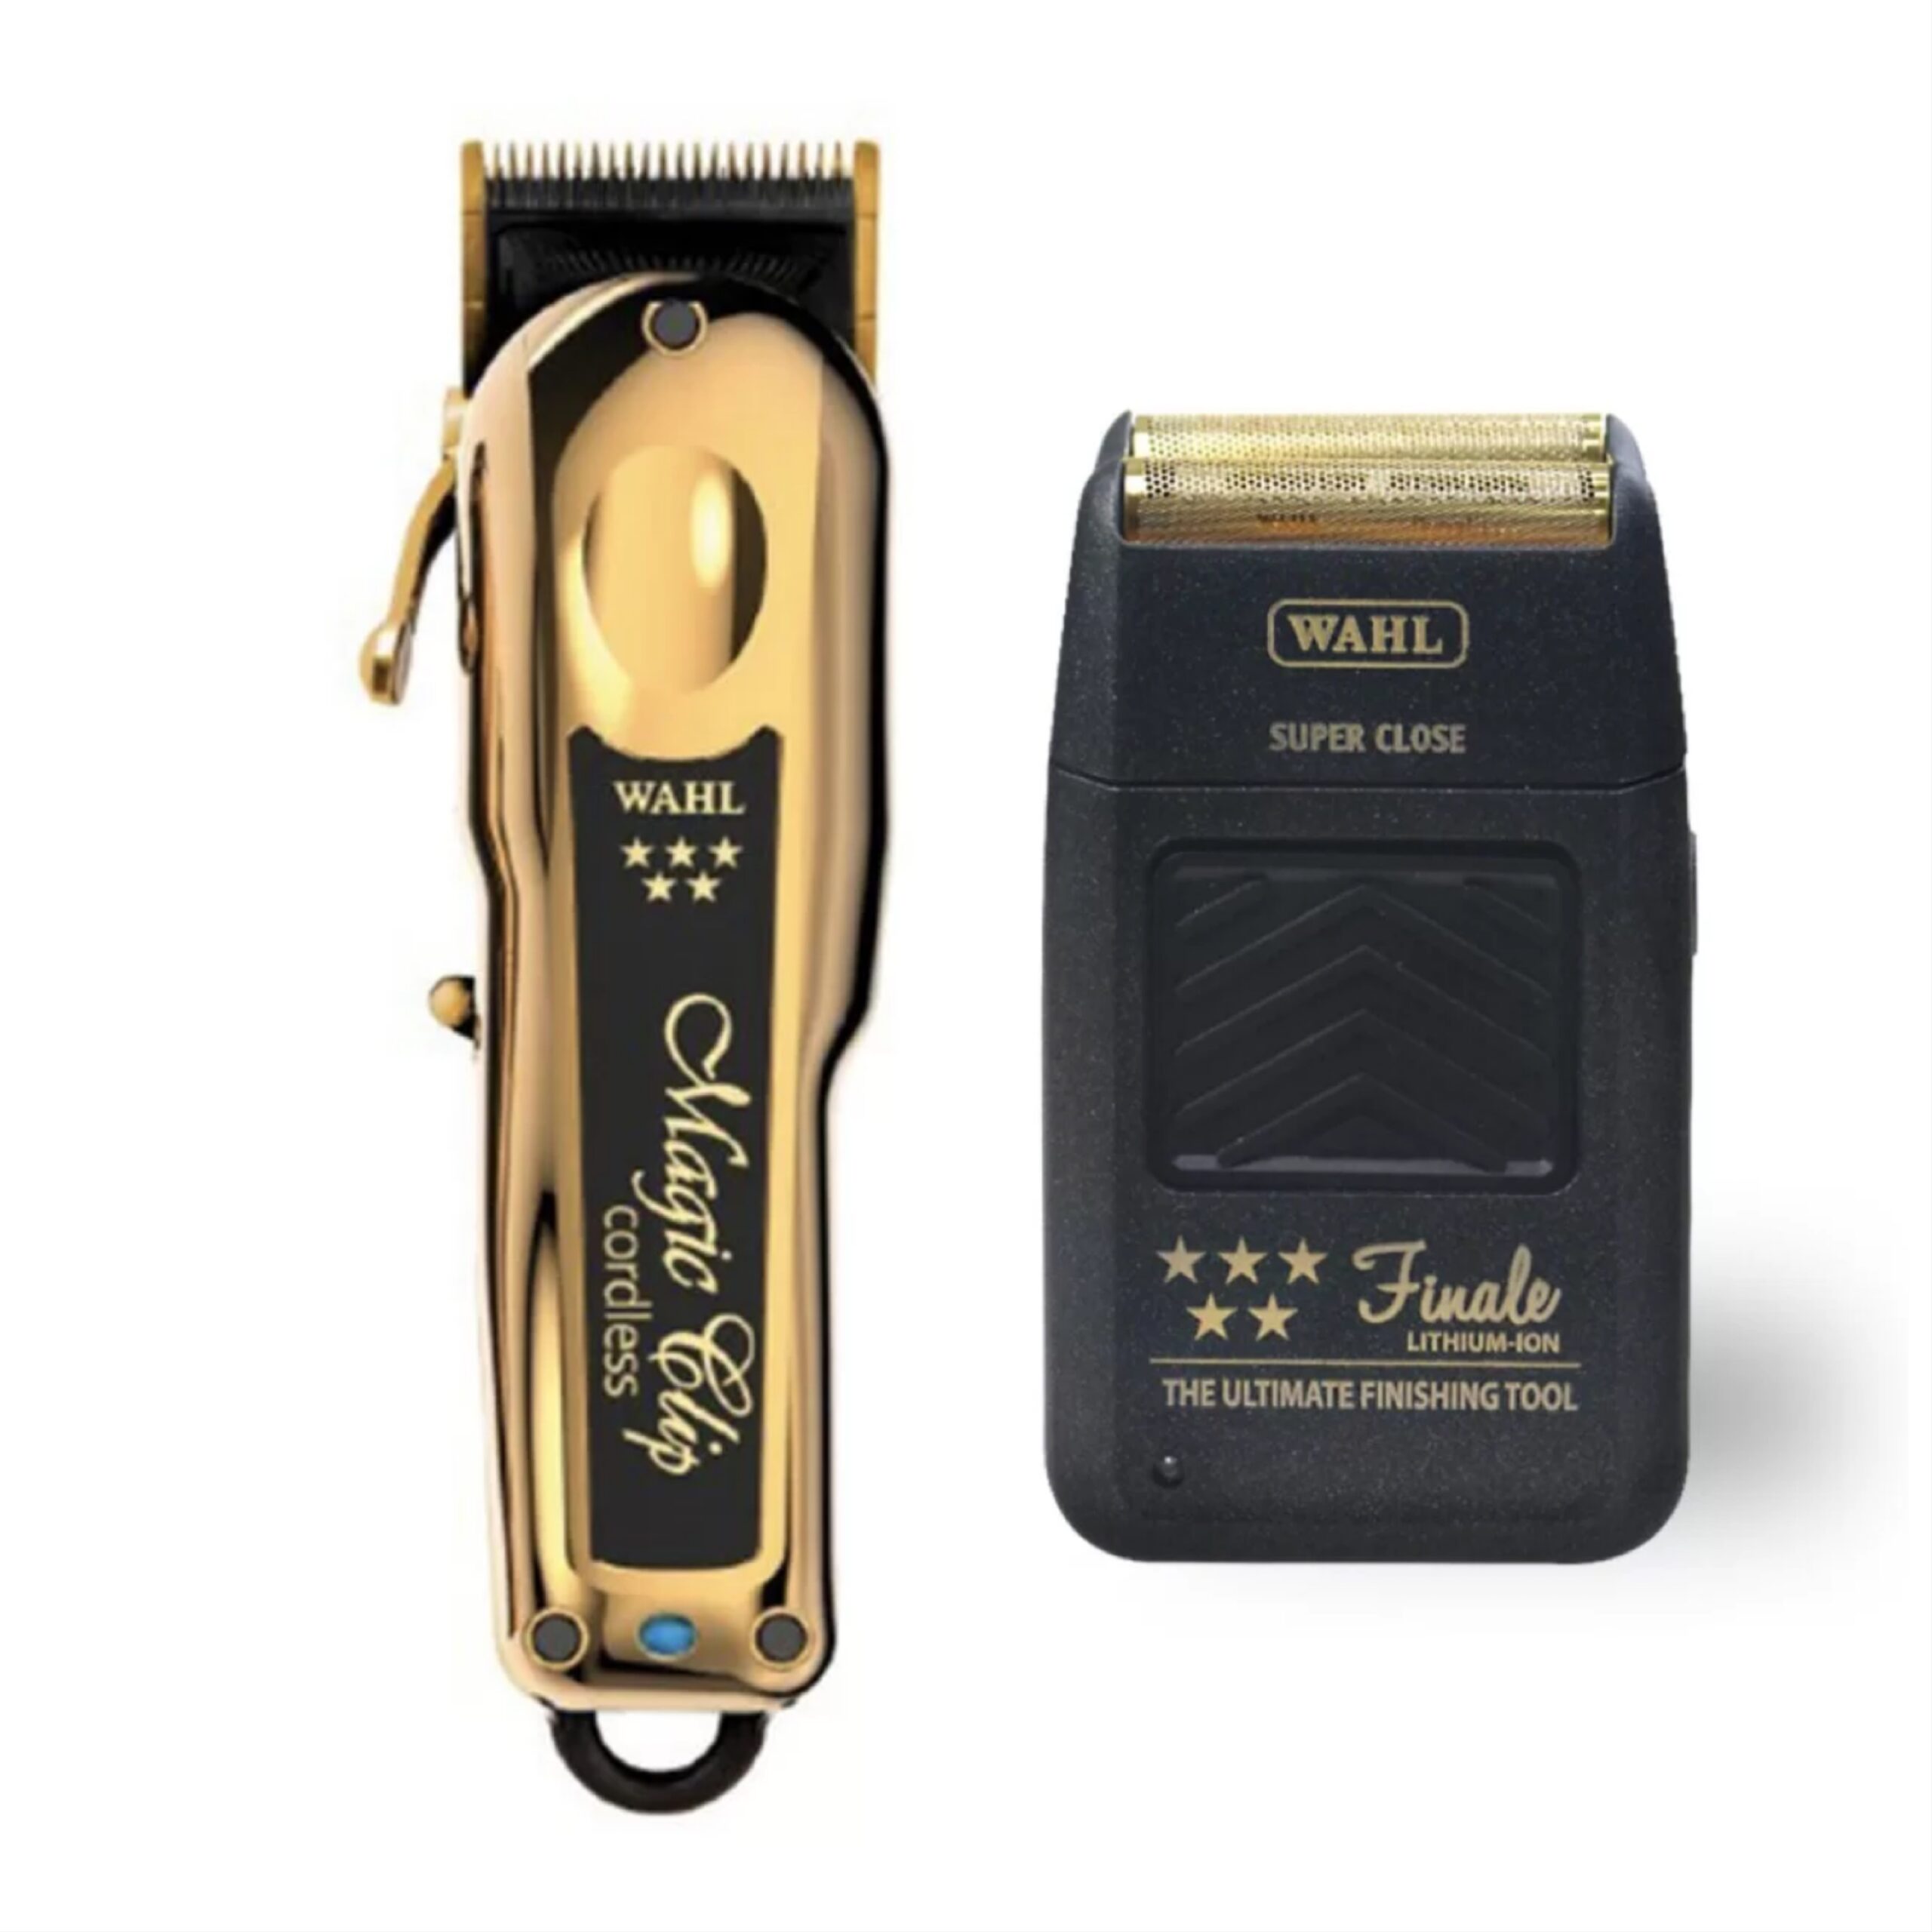 Wahl Pro 2pc Gold Limited Edition Combo by ibs - Gold Magic clip Cordless